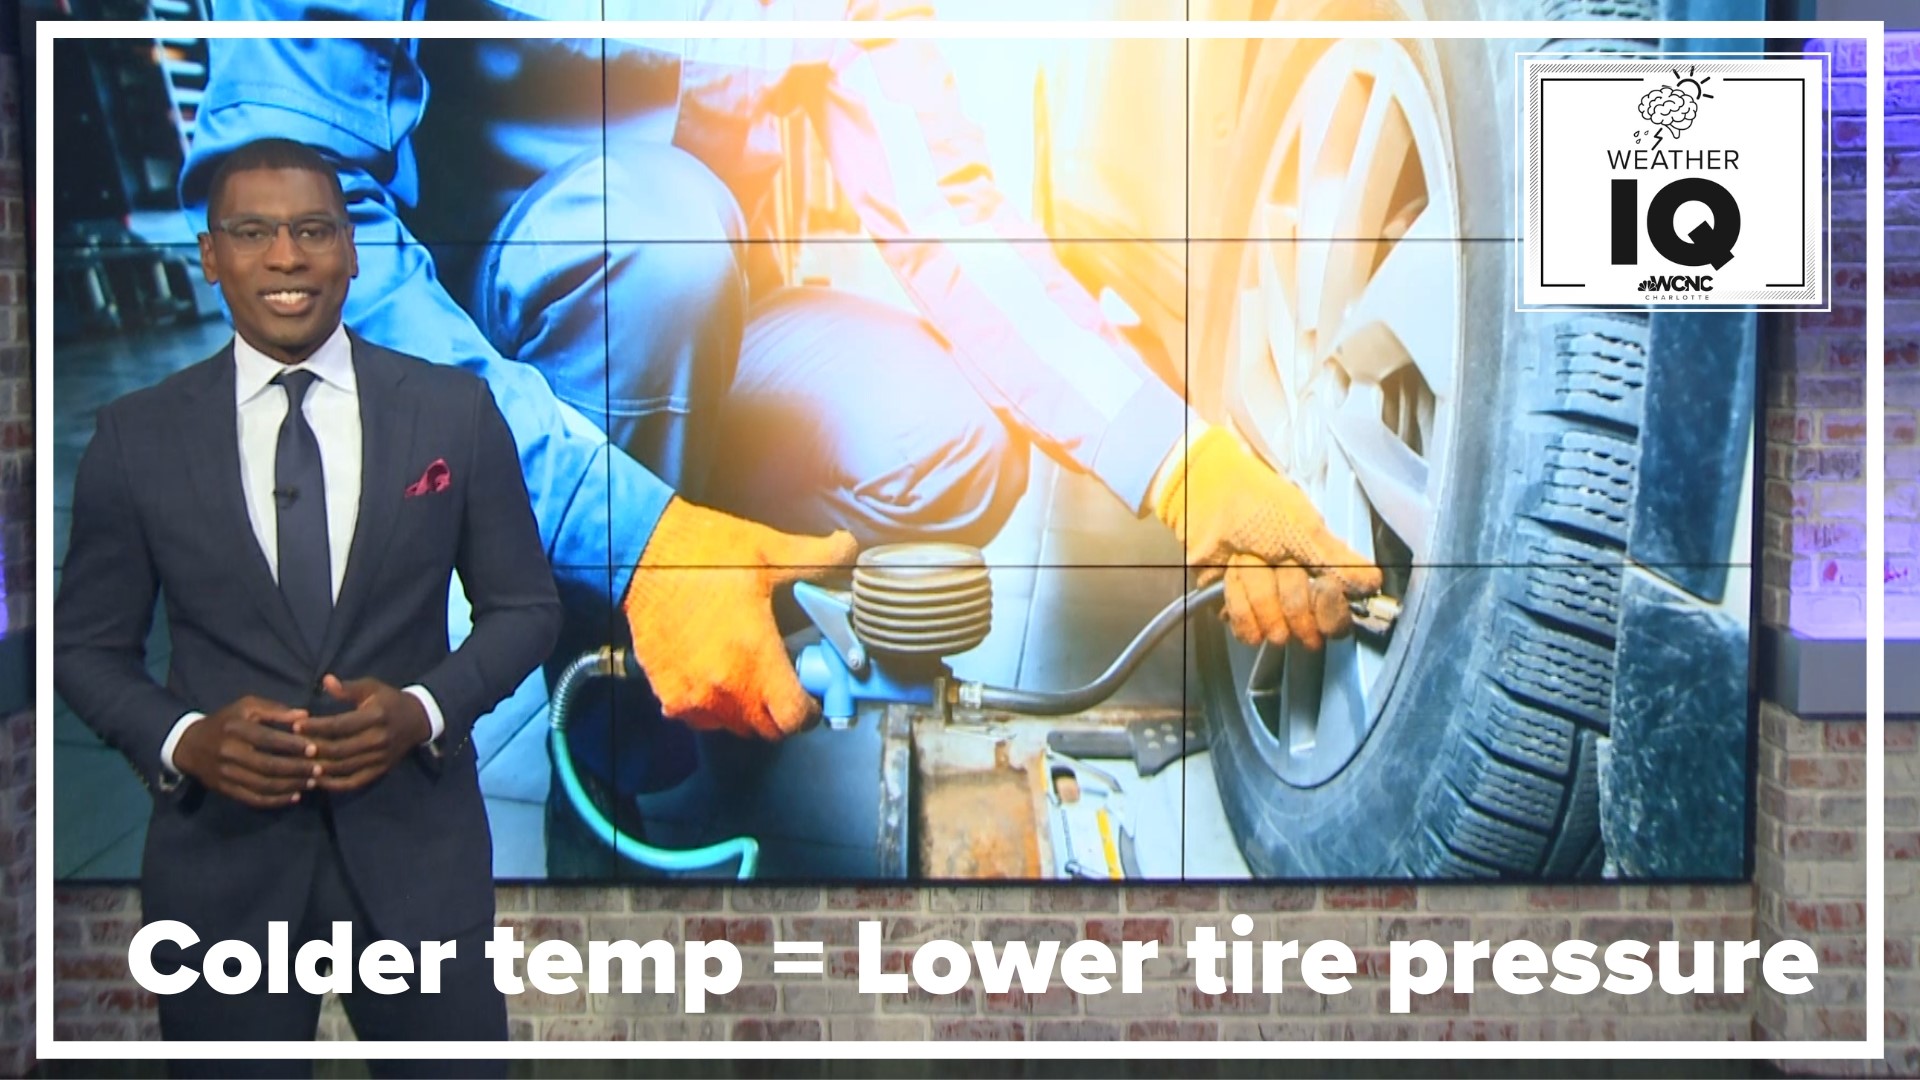 A big temperature drop not only makes us cold, but also deflates your tires.